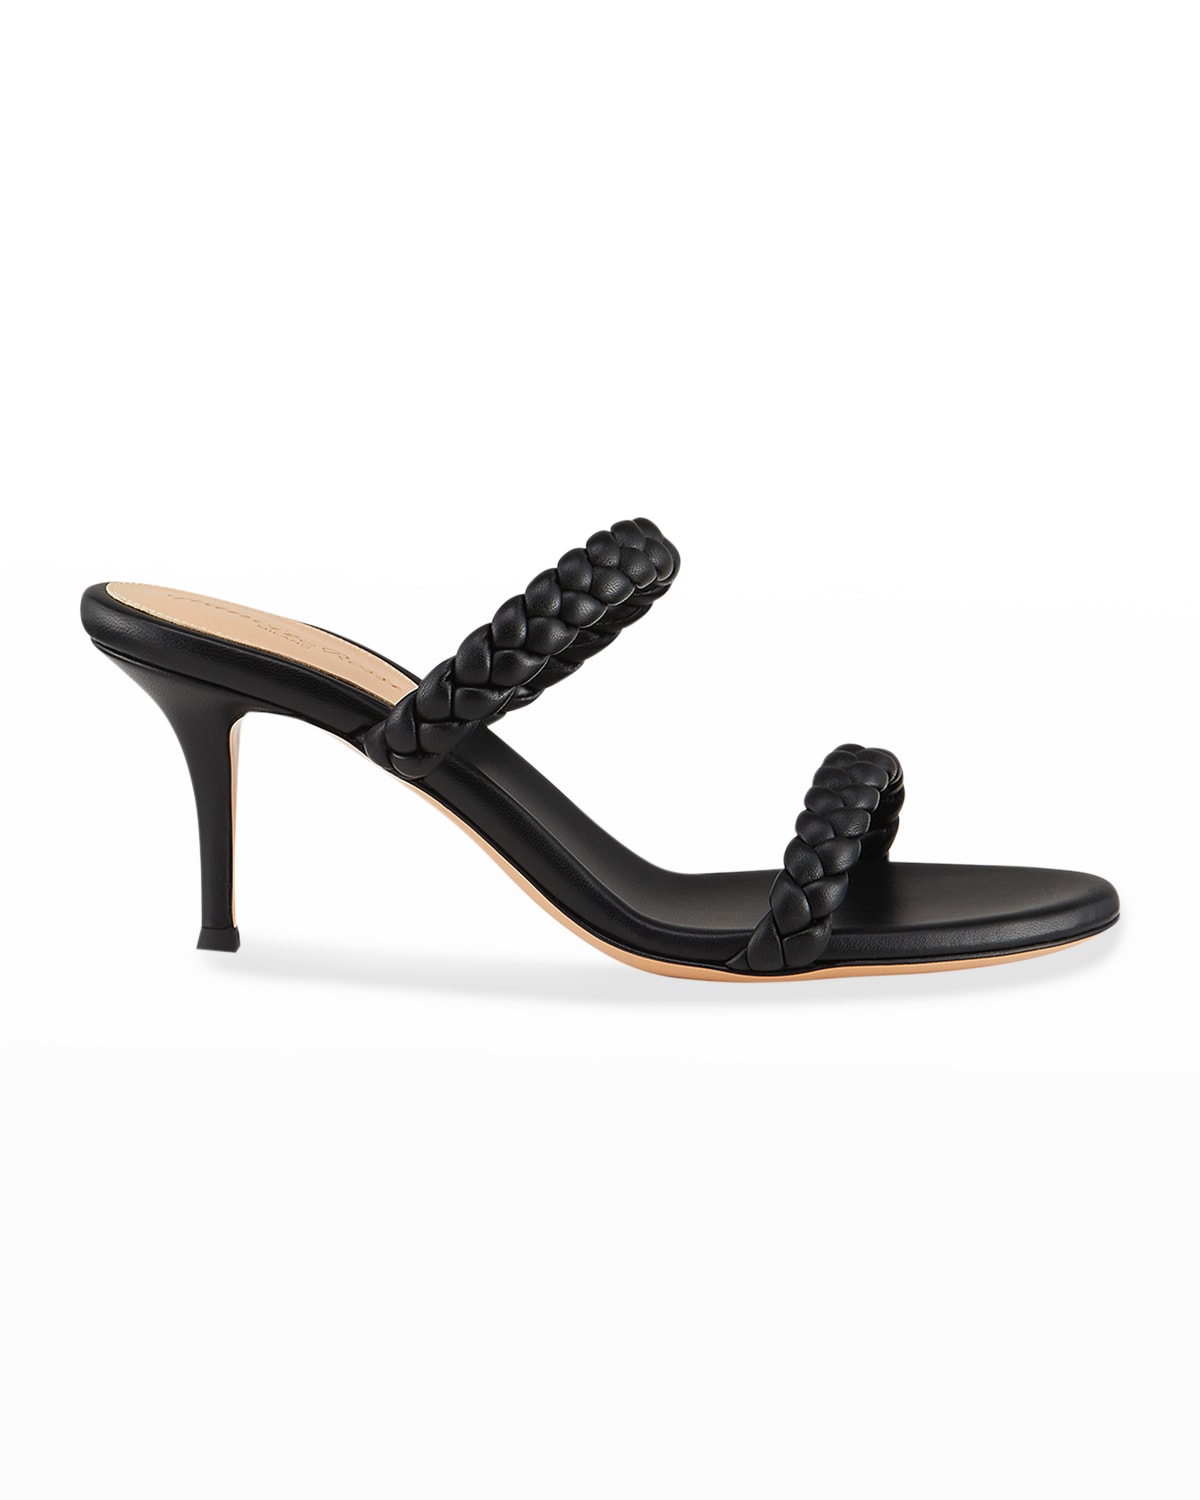 Gianvito Rossi 70mm Suede Sandals with Ring Detail | Neiman Marcus